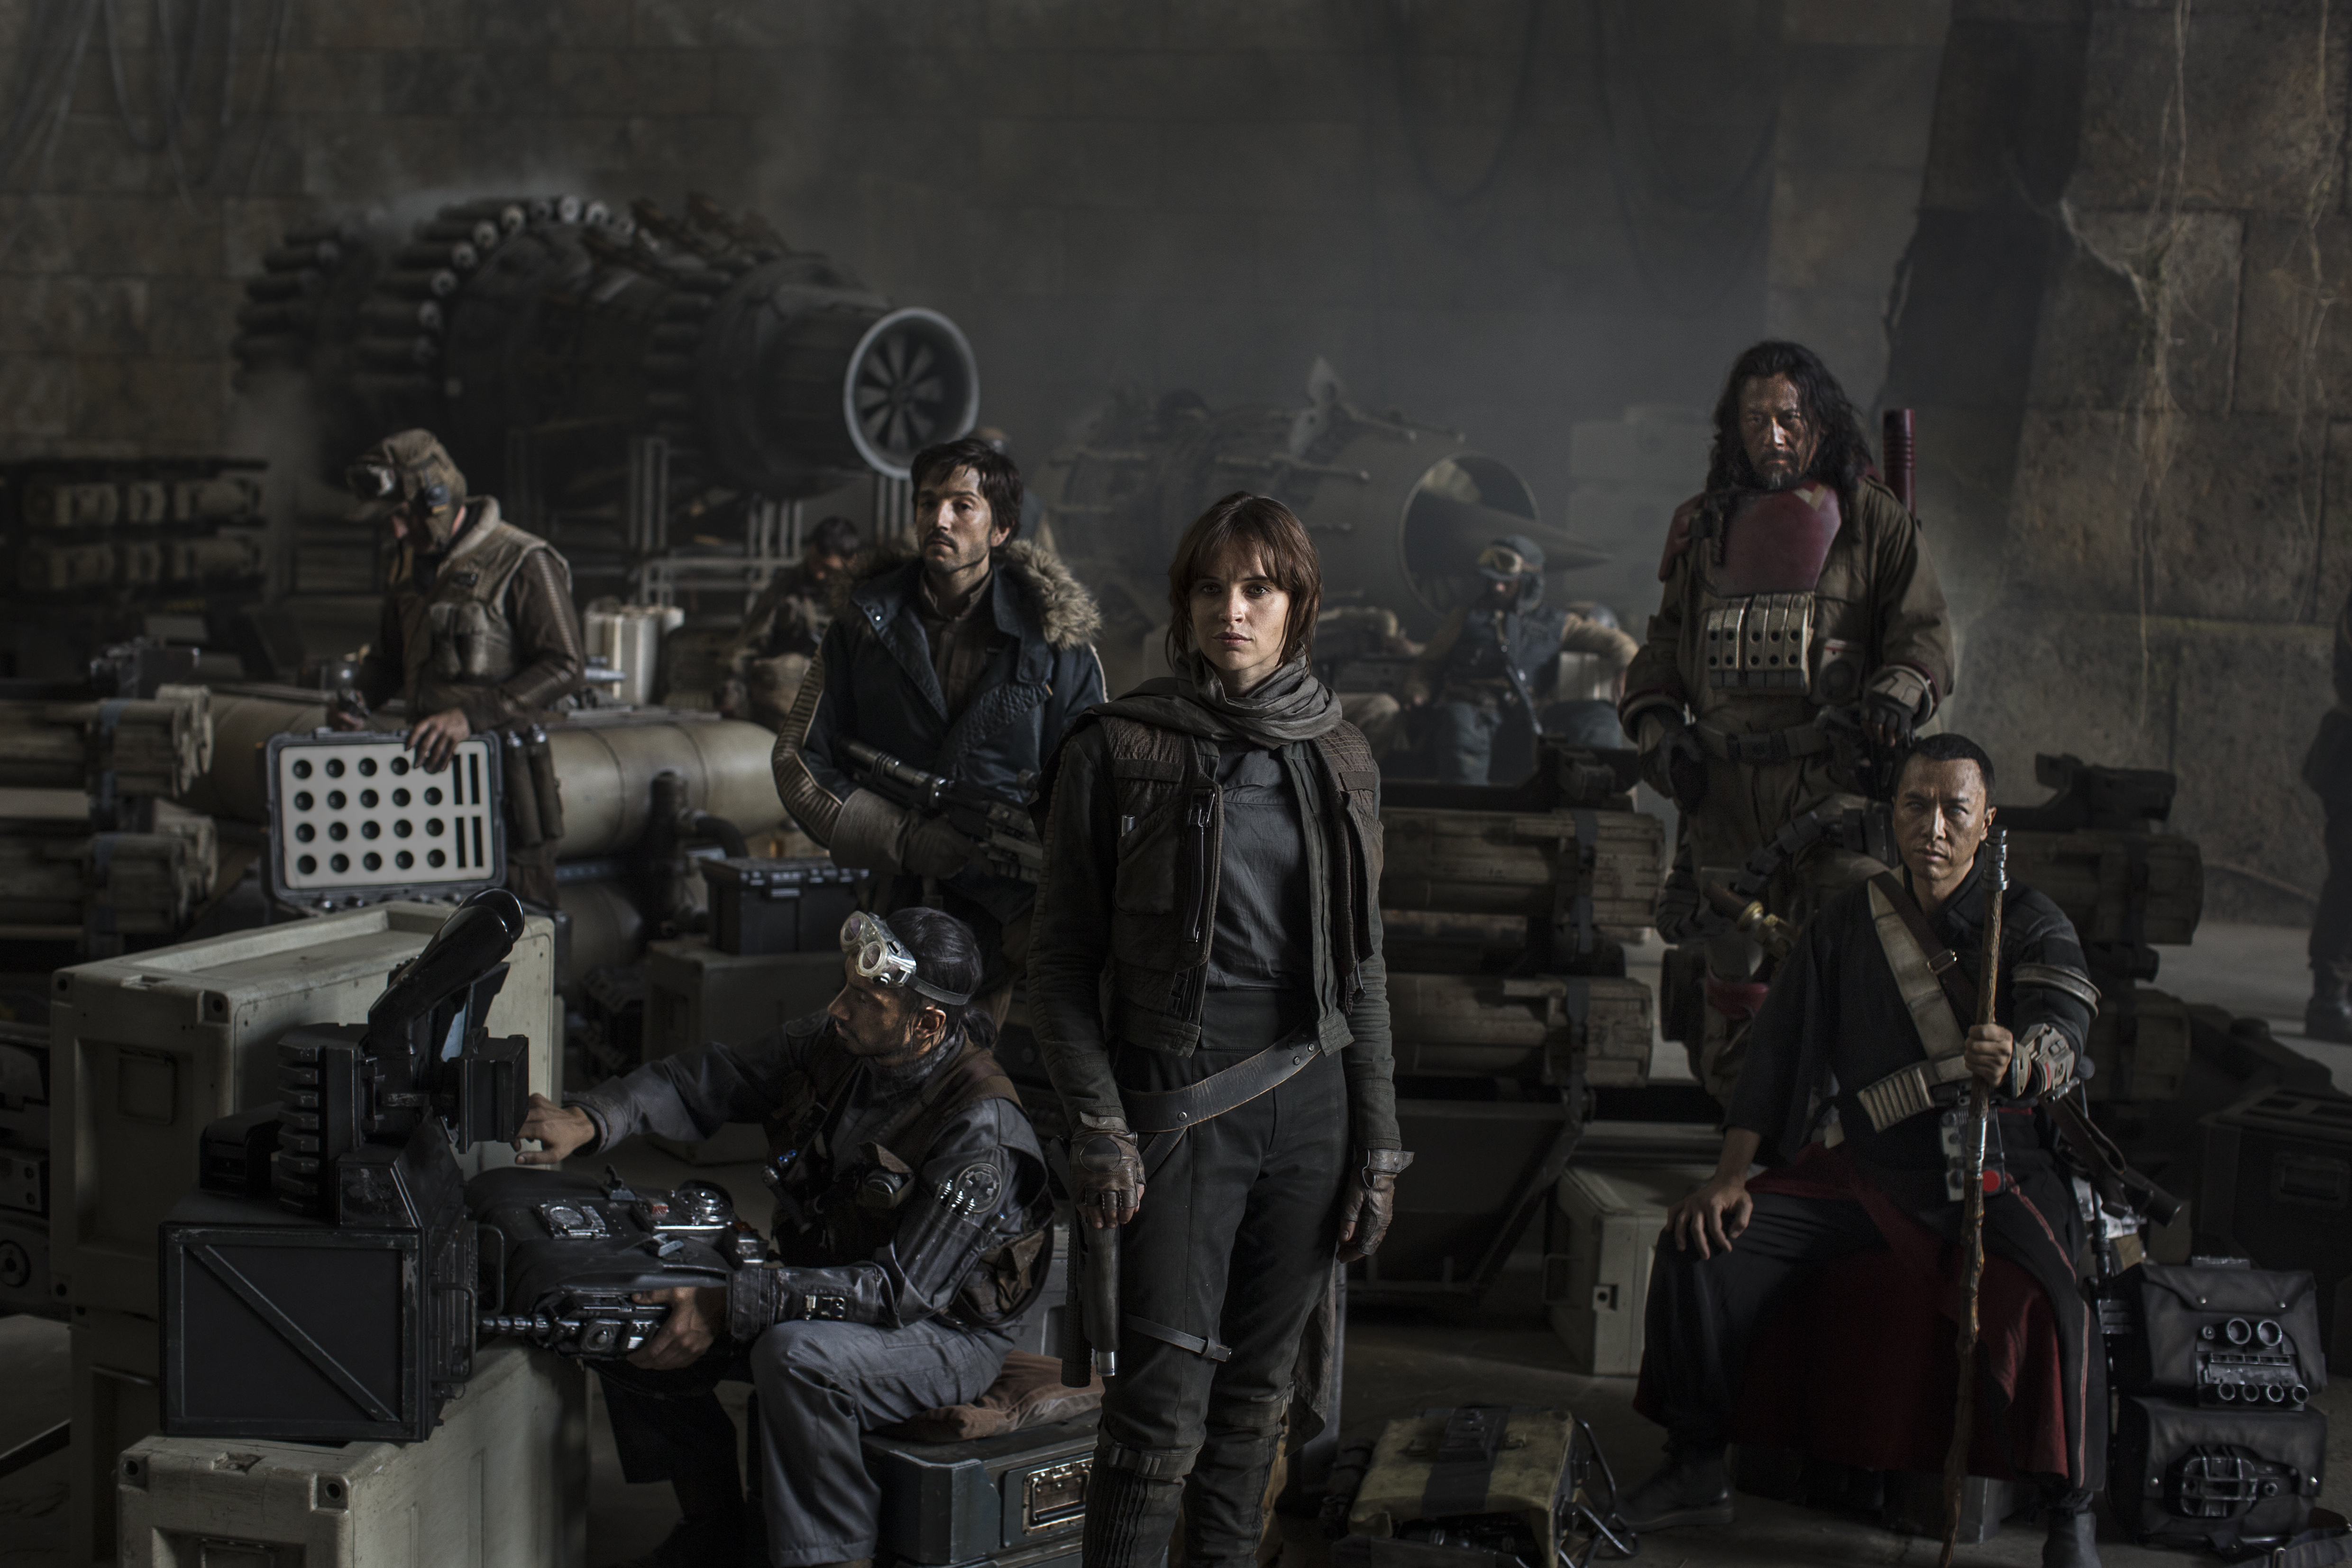 STAR WARS - Rogue One Master_cast_photo_1of2-2